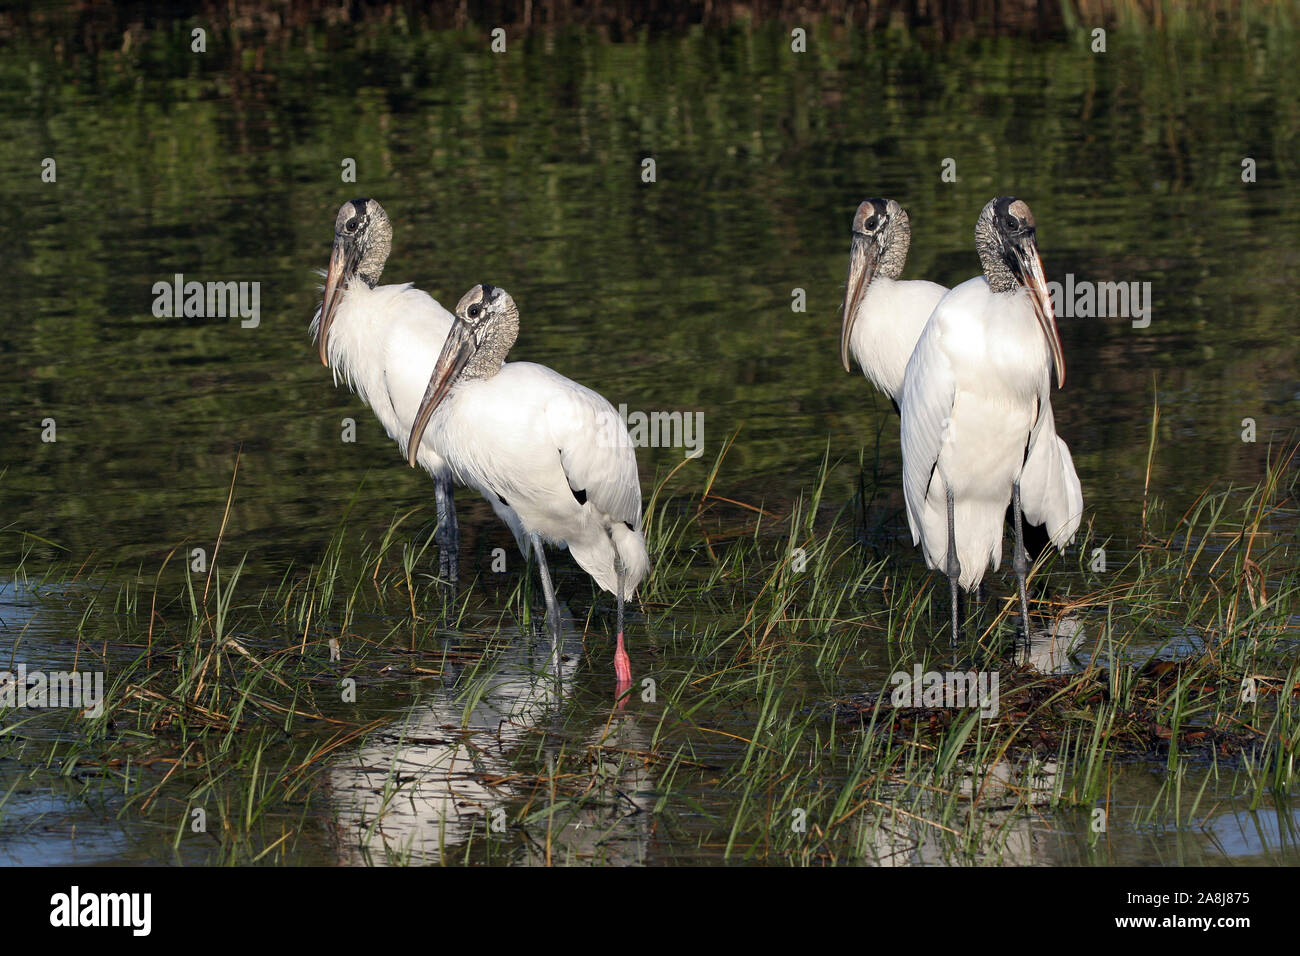 Wood Storks - Mycteria americana - wading in shallow water in Fort De Soto Park, Florida. Stock Photo